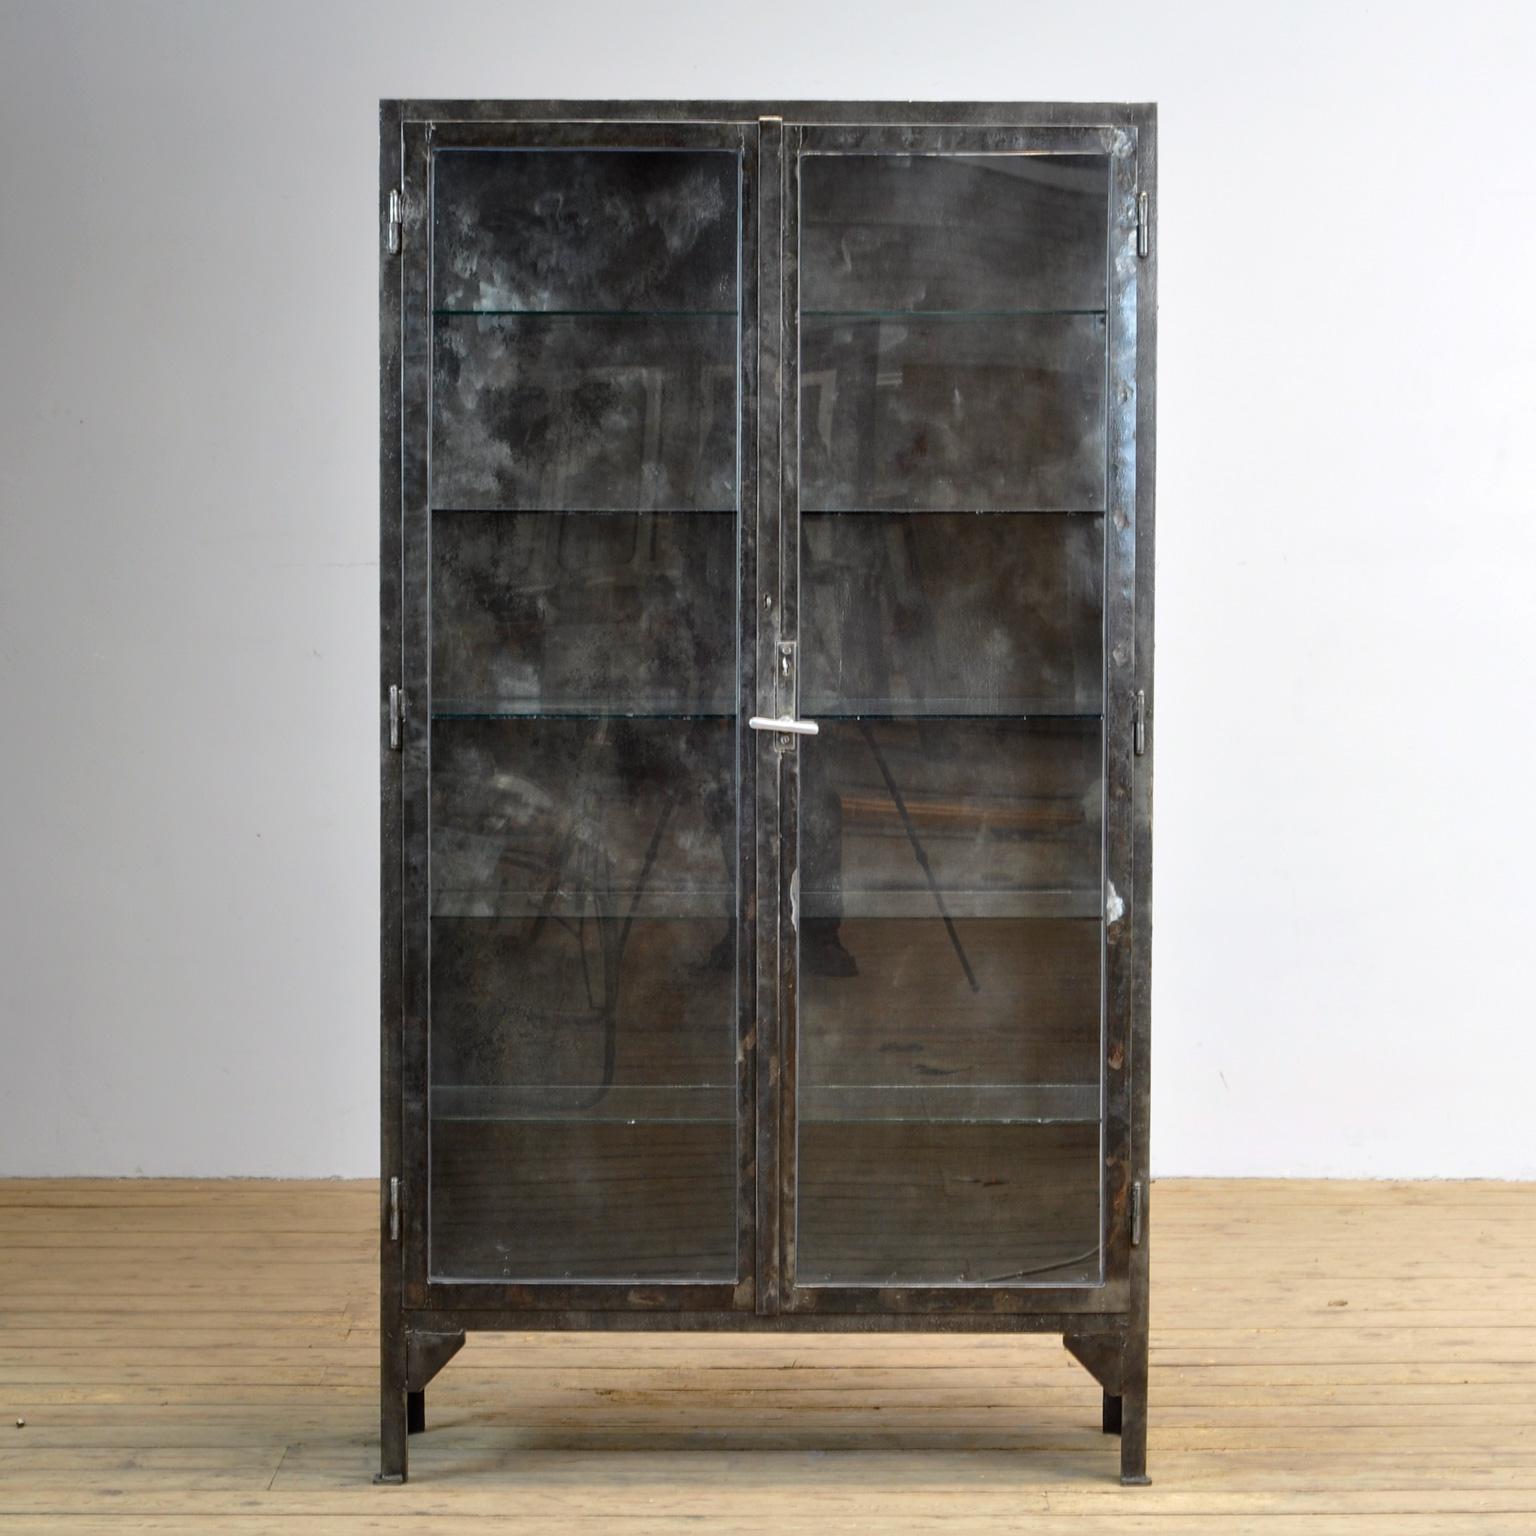 This medical cabinet was produced in the 1940s in Hungary. The cabinet is made from thick iron and glass. With the original lock and handle. The cabinet has been stripped from its paint, polished and treated for rust. It features five glass shelves.